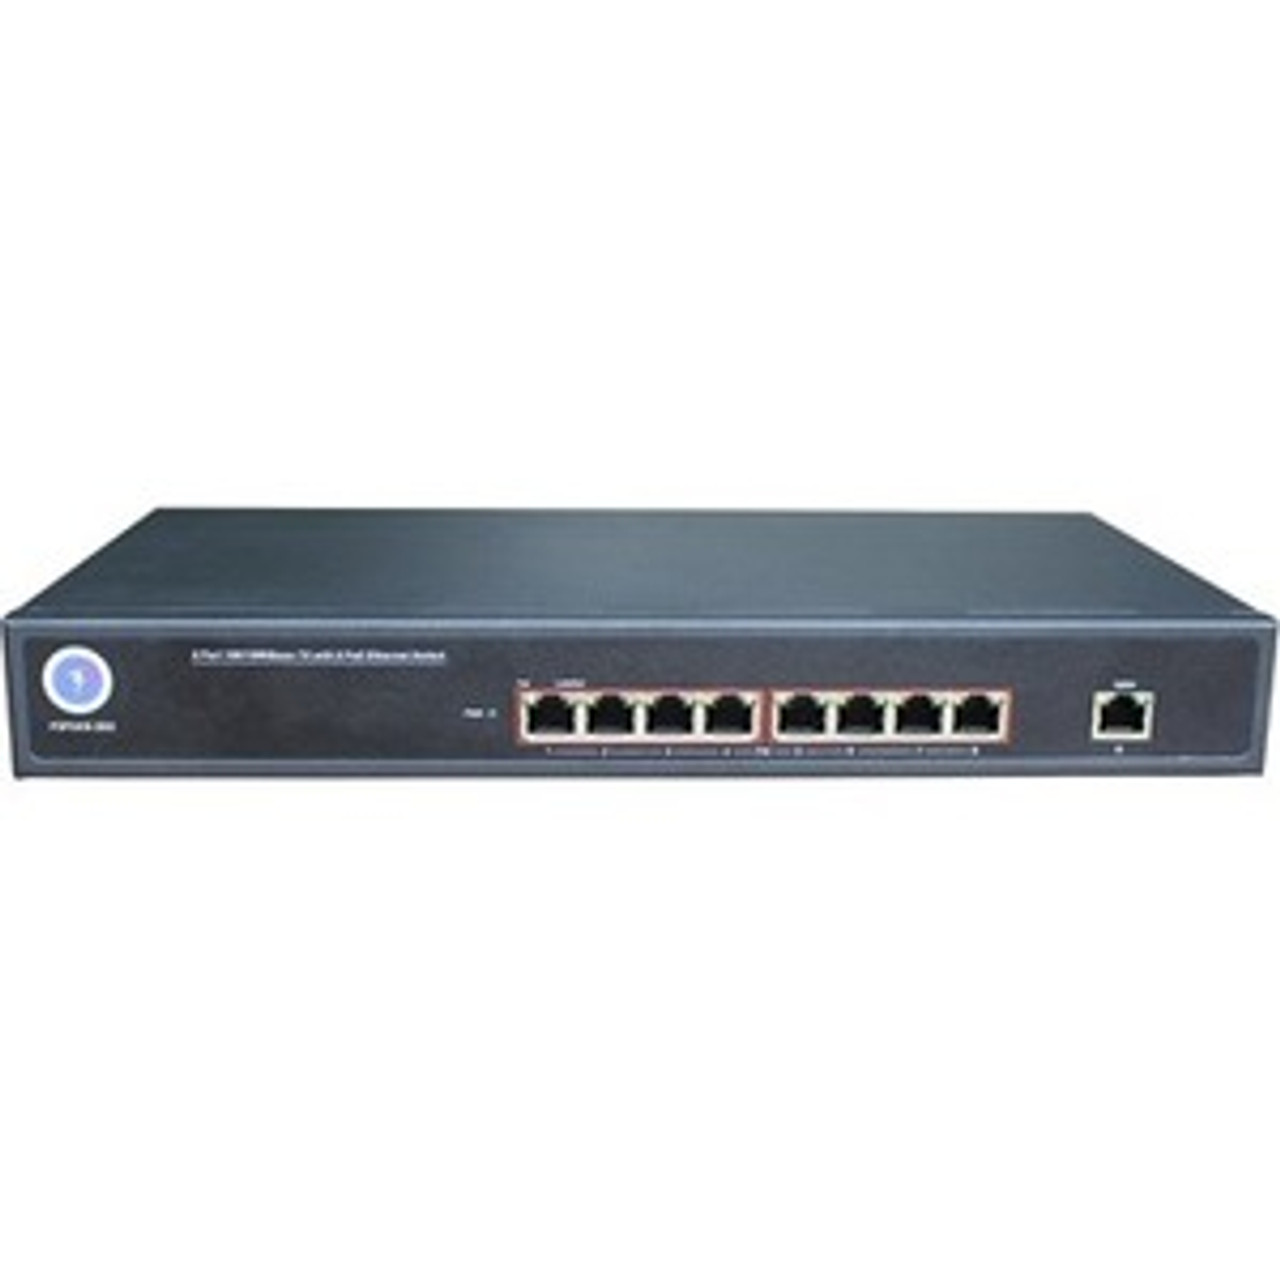 P3POE9-30G Preferred Power Products 8 Port PoE Switch - P3POE9-30G - 8 Ports - Gigabit Ethernet - 10/100/1000Base-TX - 2 Layer Supported - Power Supply -